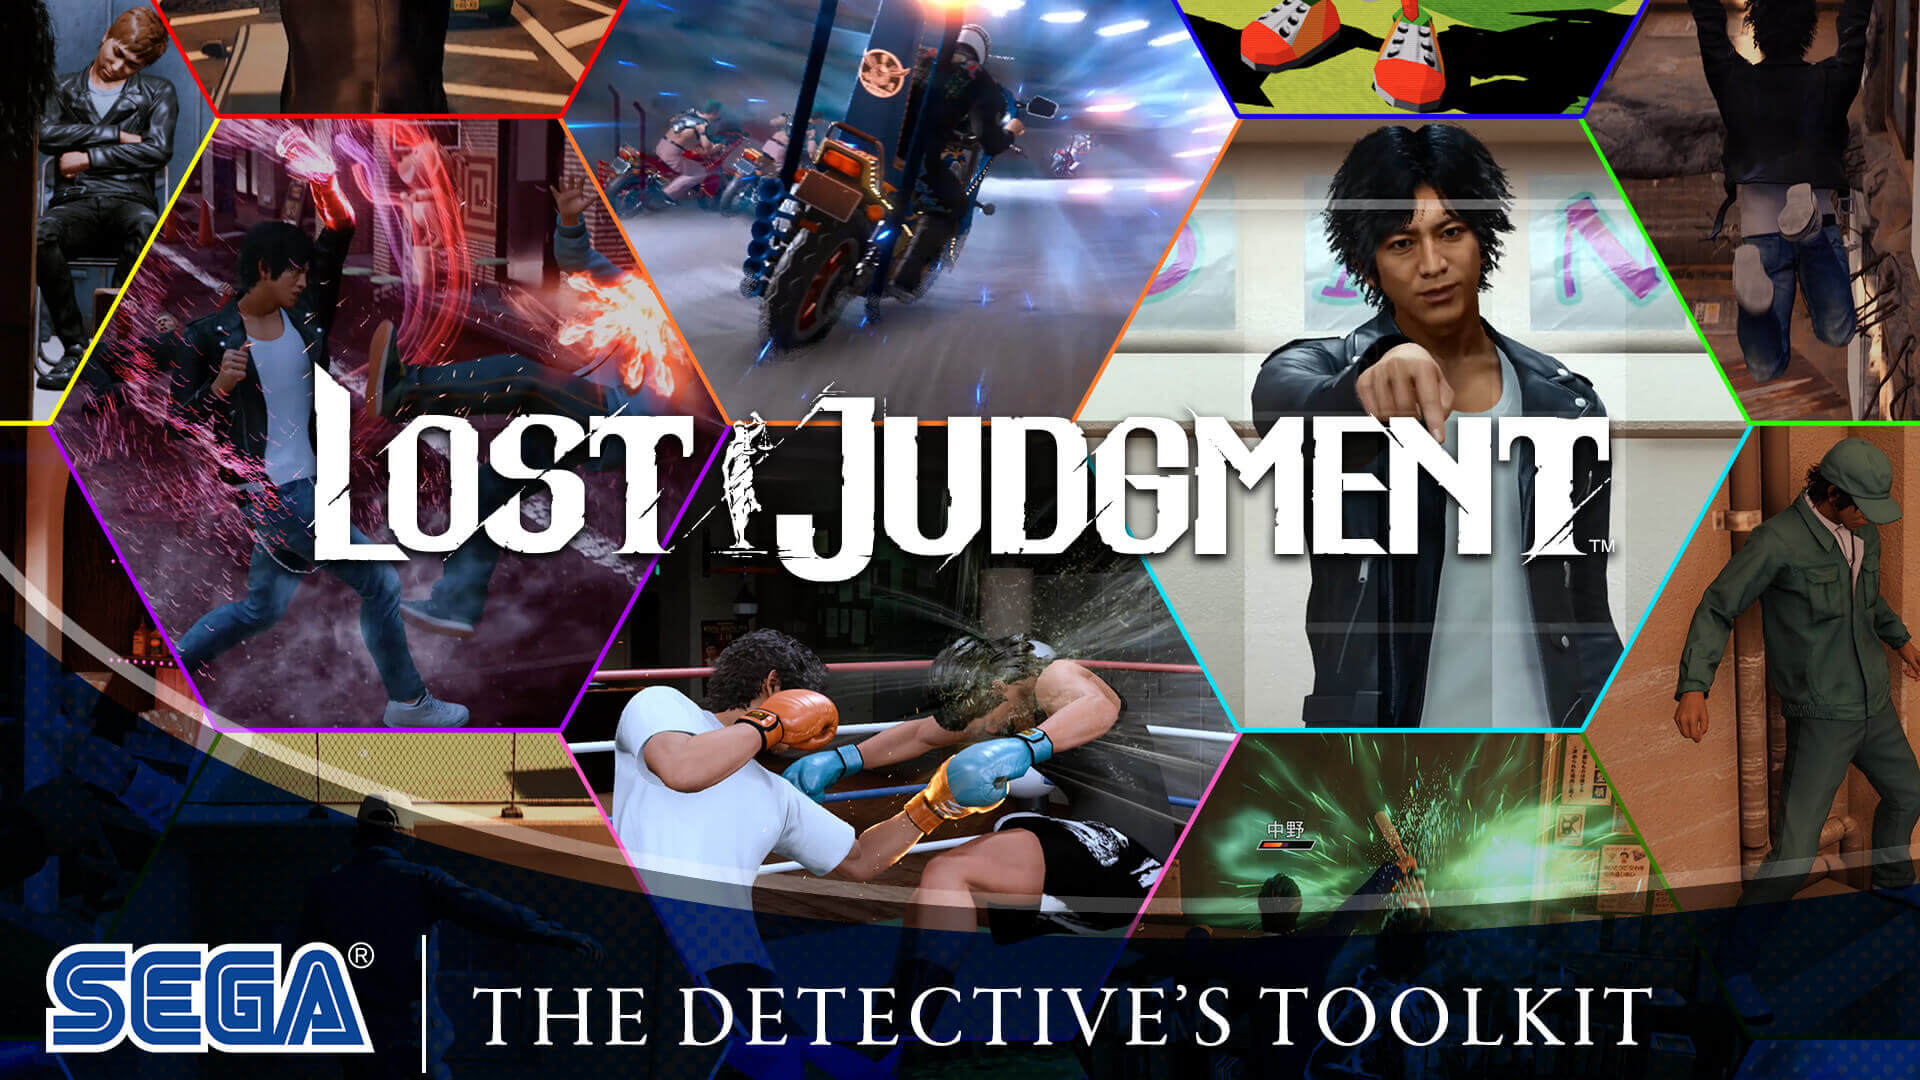 Game One PH - Lost Judgment for PS5 and PS4 is now